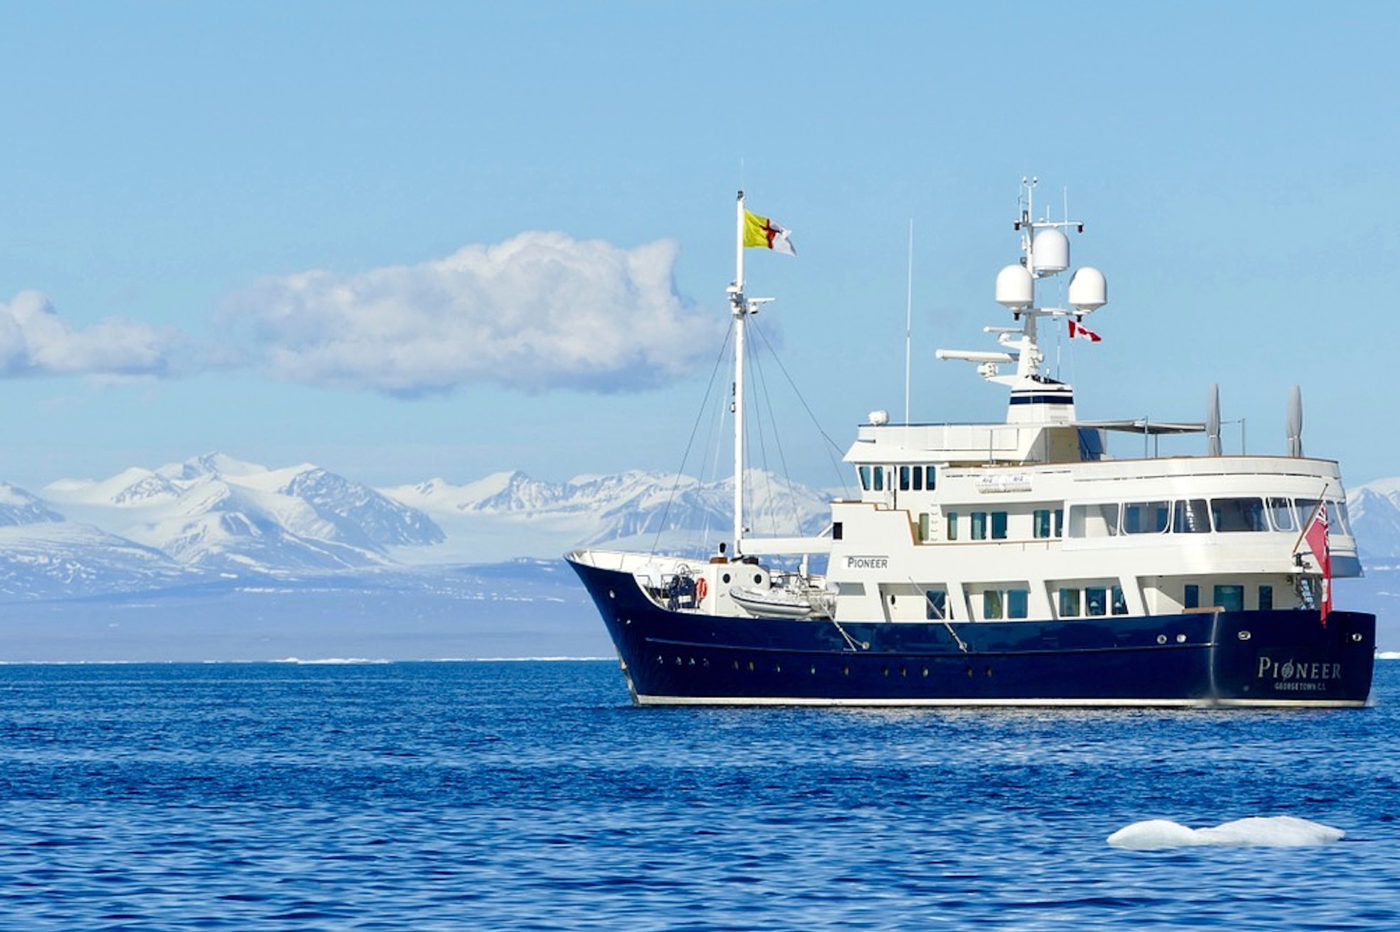 Vripack - Pioneer - Journey of a lifetime - At sea - Explorer Yacht - High Latitude Journey